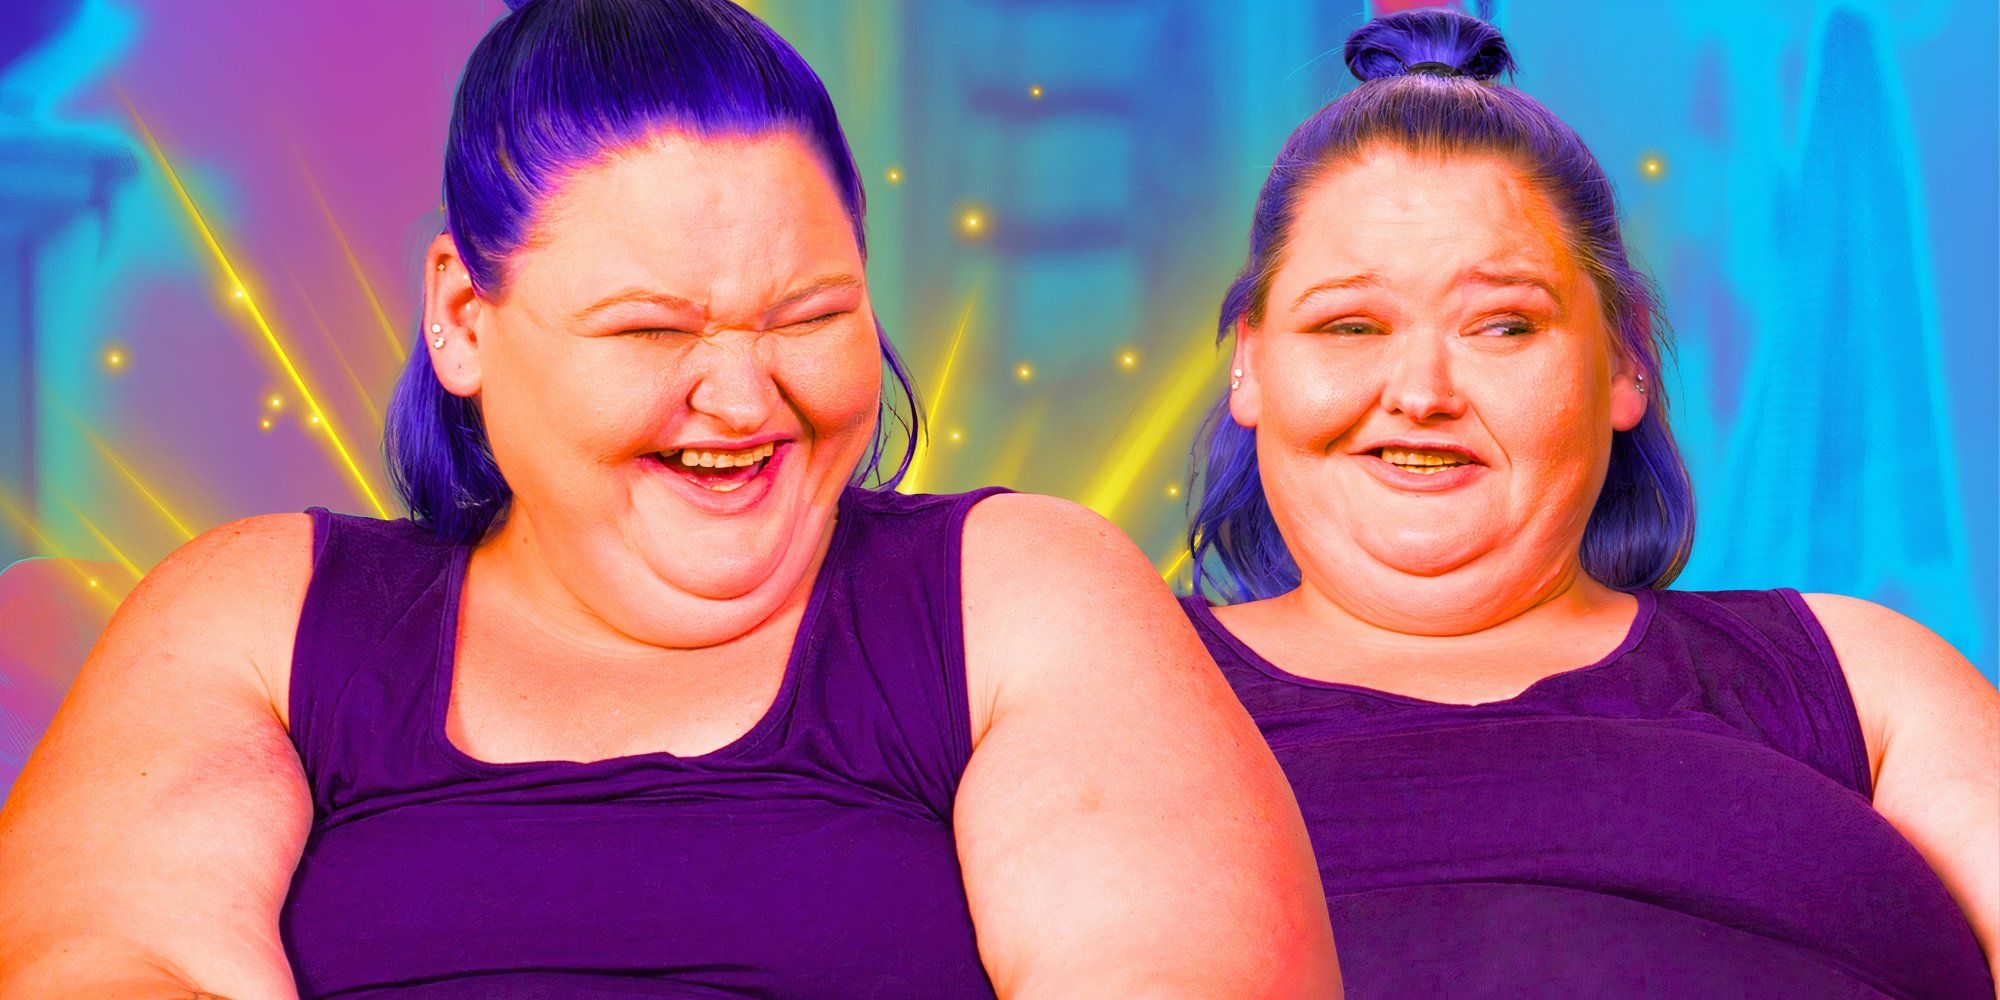 1000-Lb Sisters: Amy’s 8 Worst Fashion Fails After “Happier Than Ever” Weight Loss Transformation